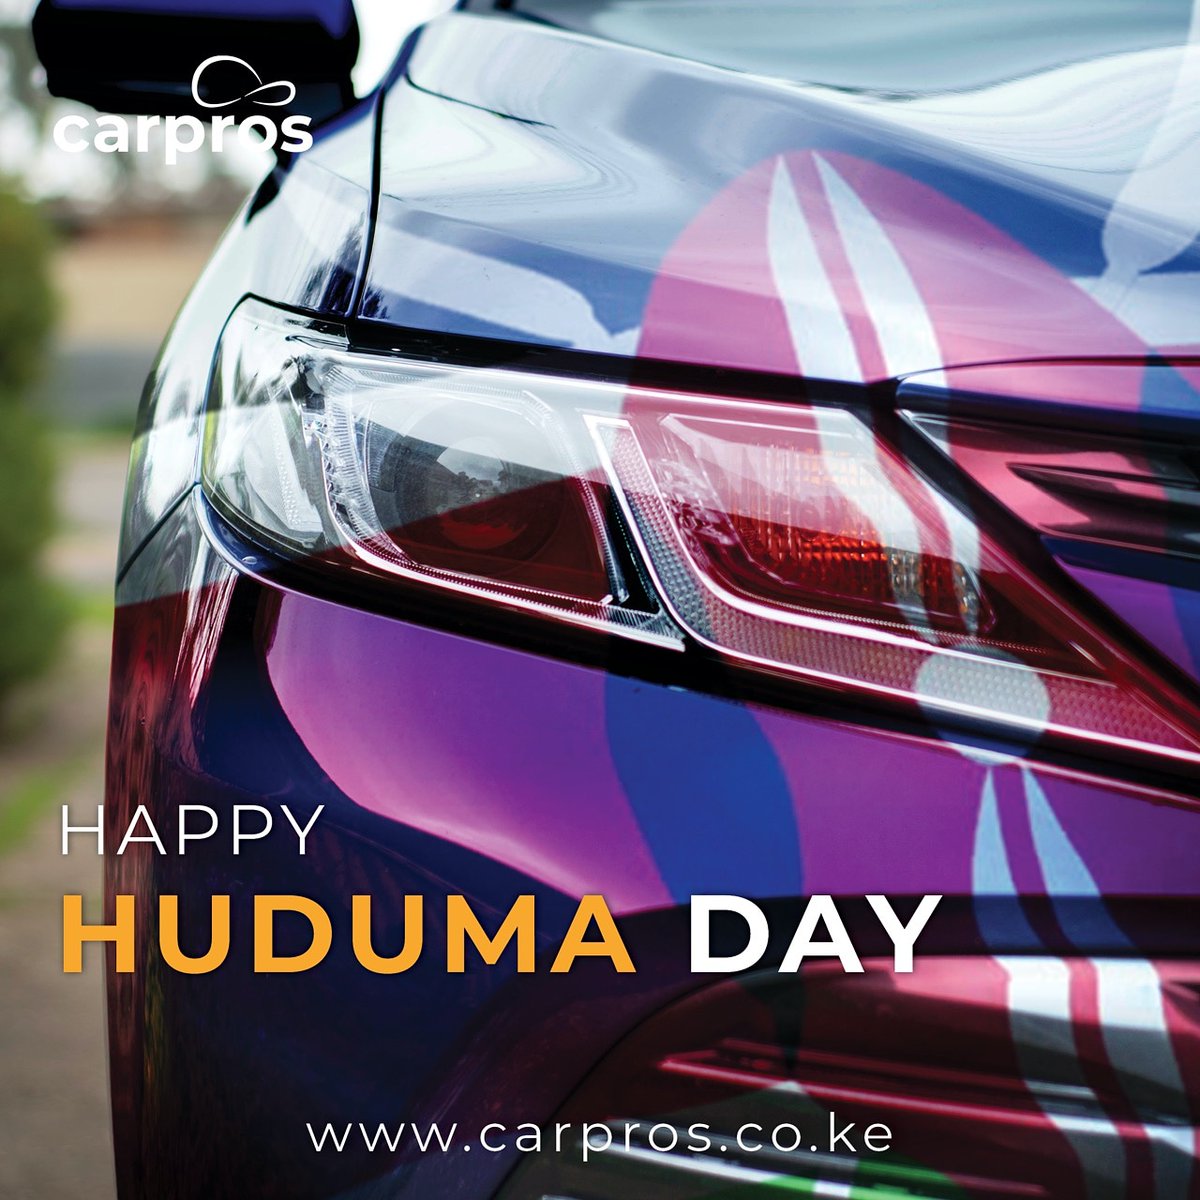 The best way to find yourself is to lose yourself in the service of others. - Mahatma Gandhi

#HappyHudumaDay
#CarprosKenya